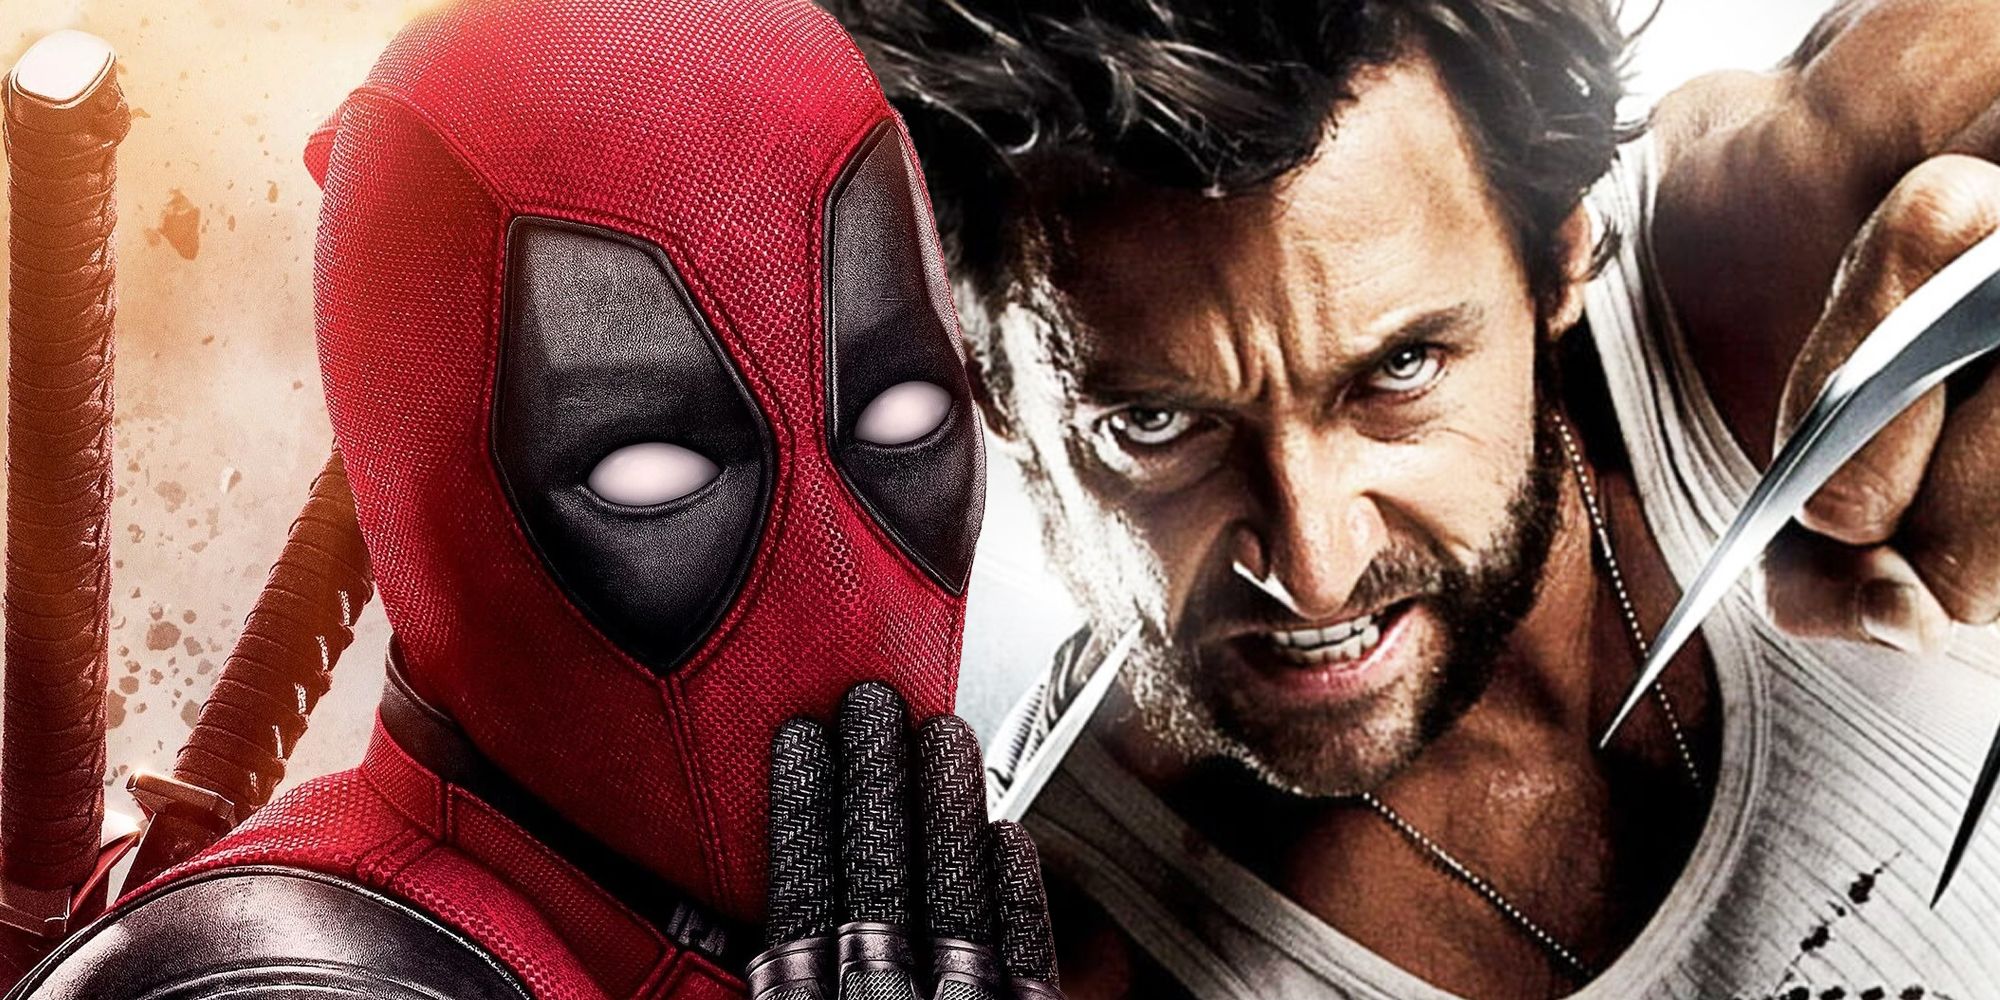 Deadpool's Healing Factor is The Opposite of Wolverine's, Not The Same